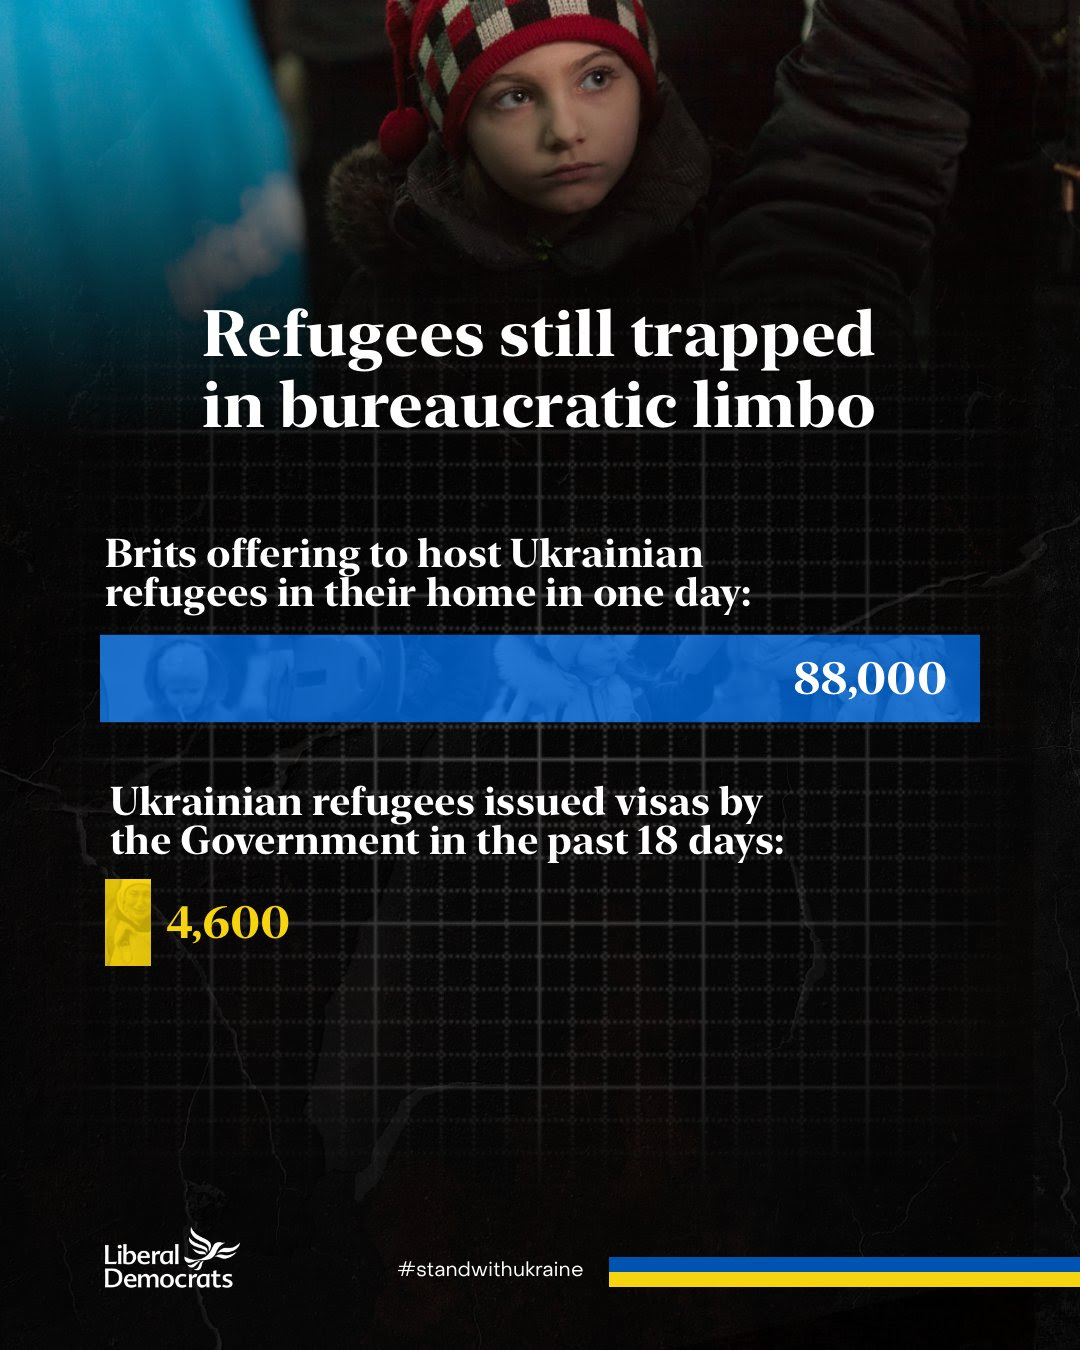 Just 4,600 visas offered to Ukrainian refugees as of 15th March 2022